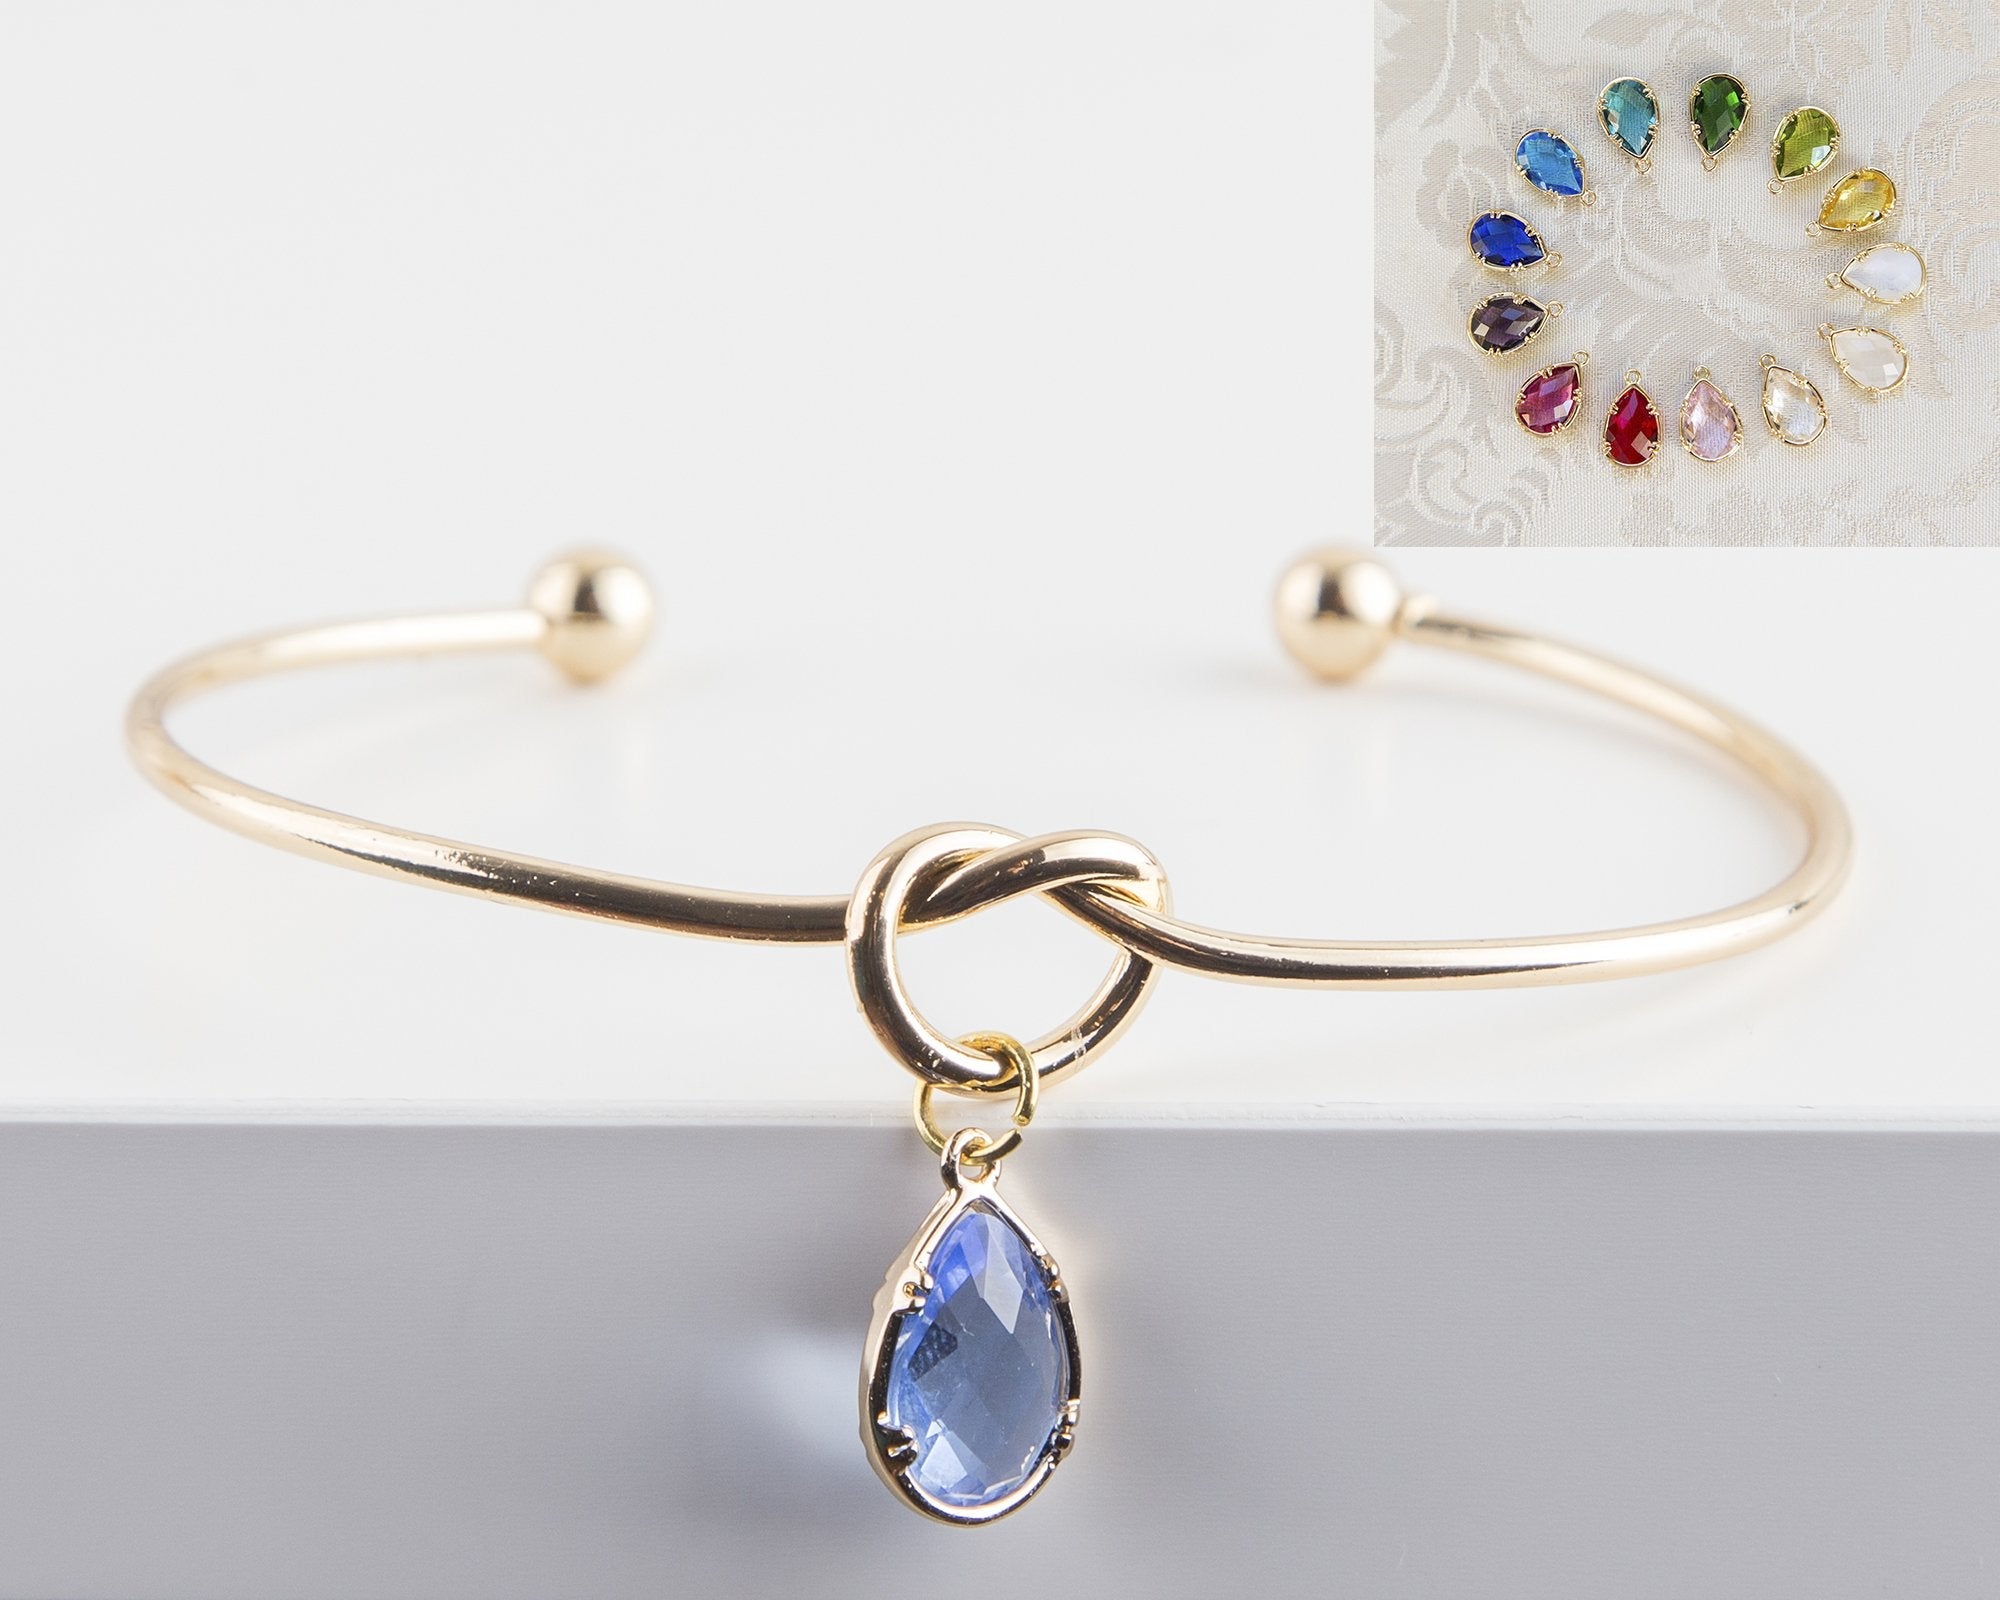 Adjustable Birthstone Knot Wire Bracelet with Teardrop - Gold Plated Stainless Steel Bijou Her